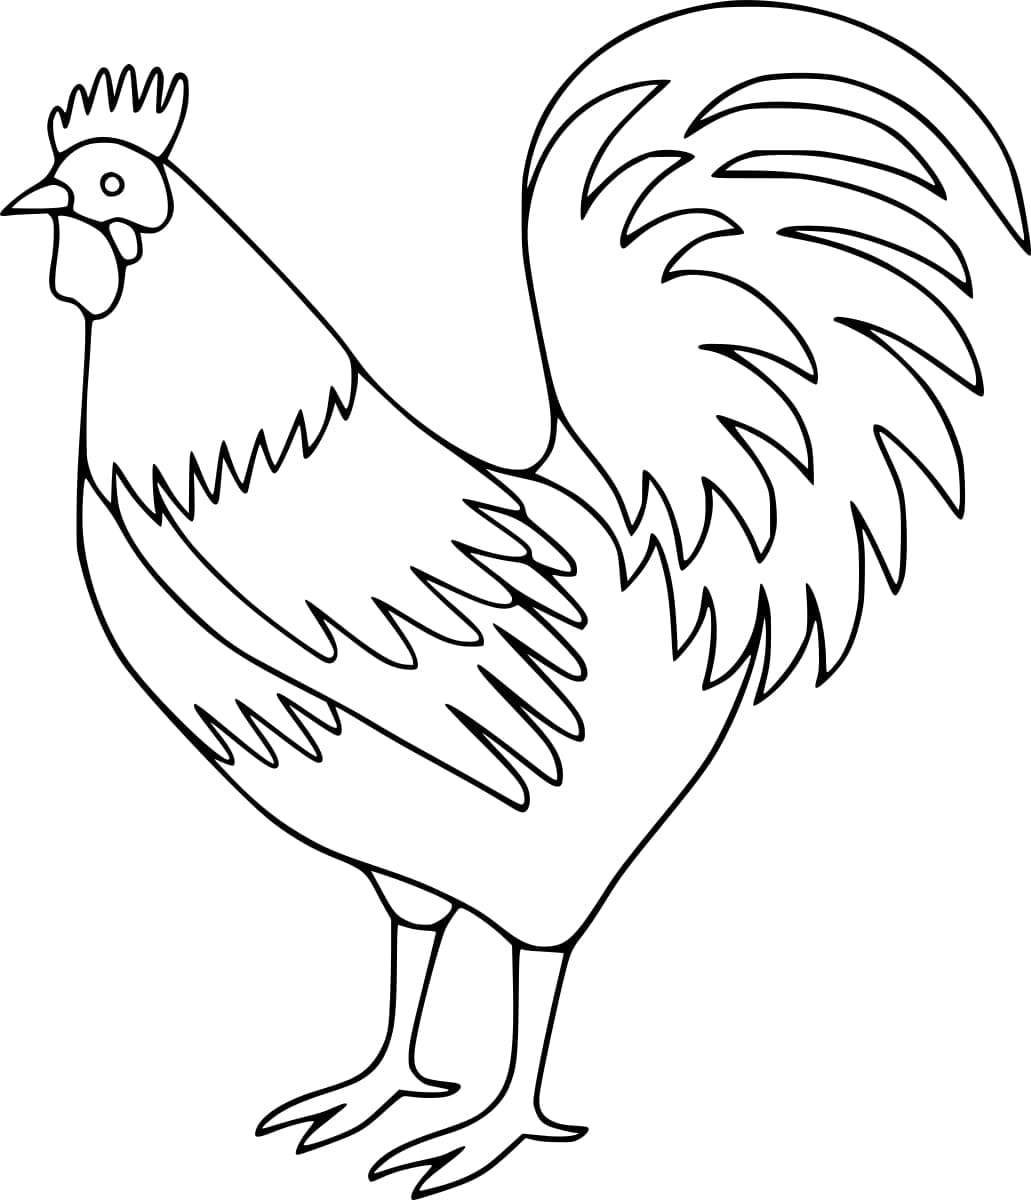 Coq Imprimable coloring page